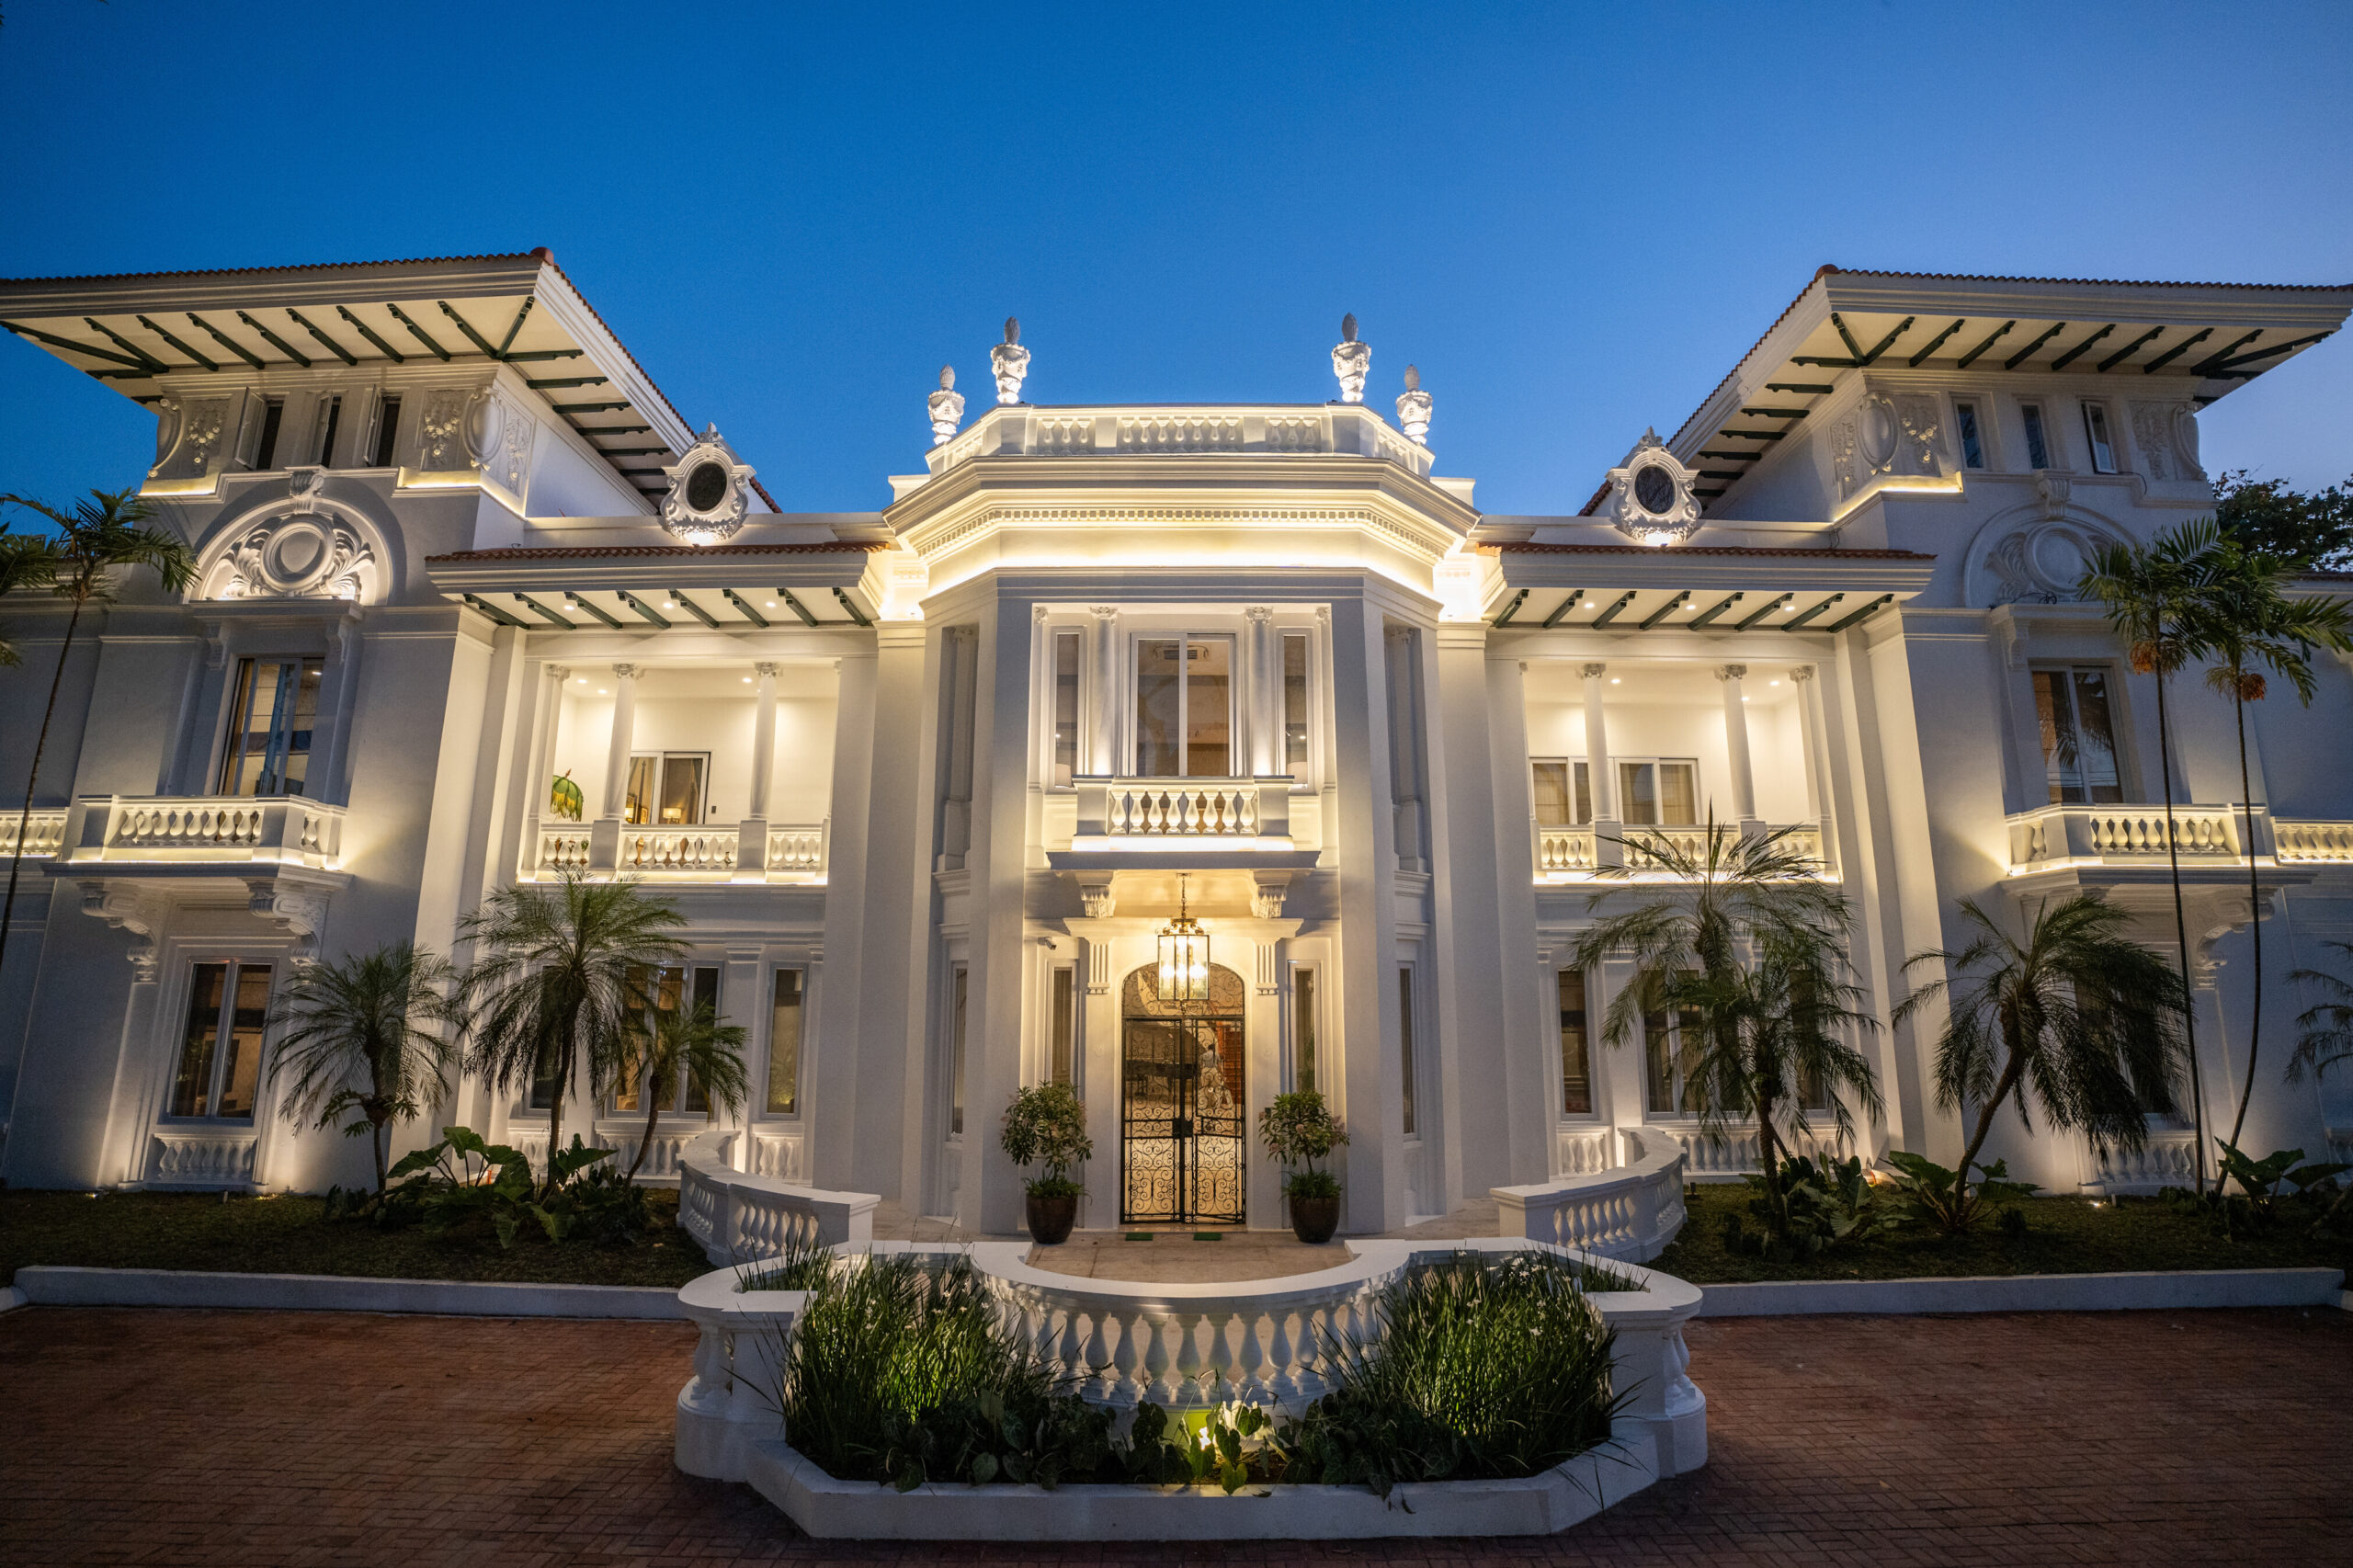 Laperal Mansion: The newly restored Presidential Guest House